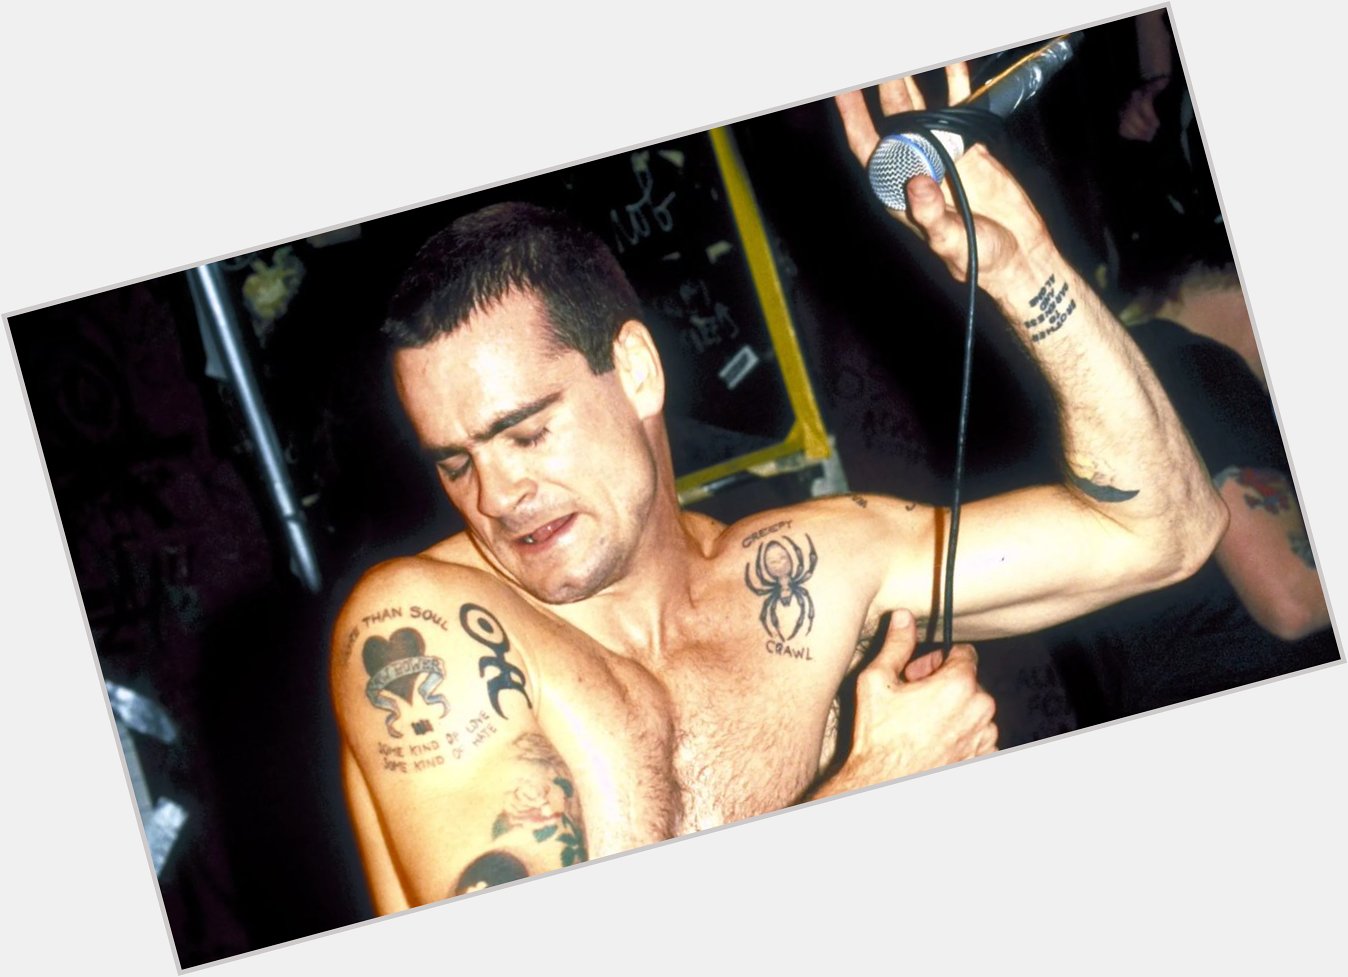 Happy 60th to Henry Rollins of Black Flag and the Rollins Band  